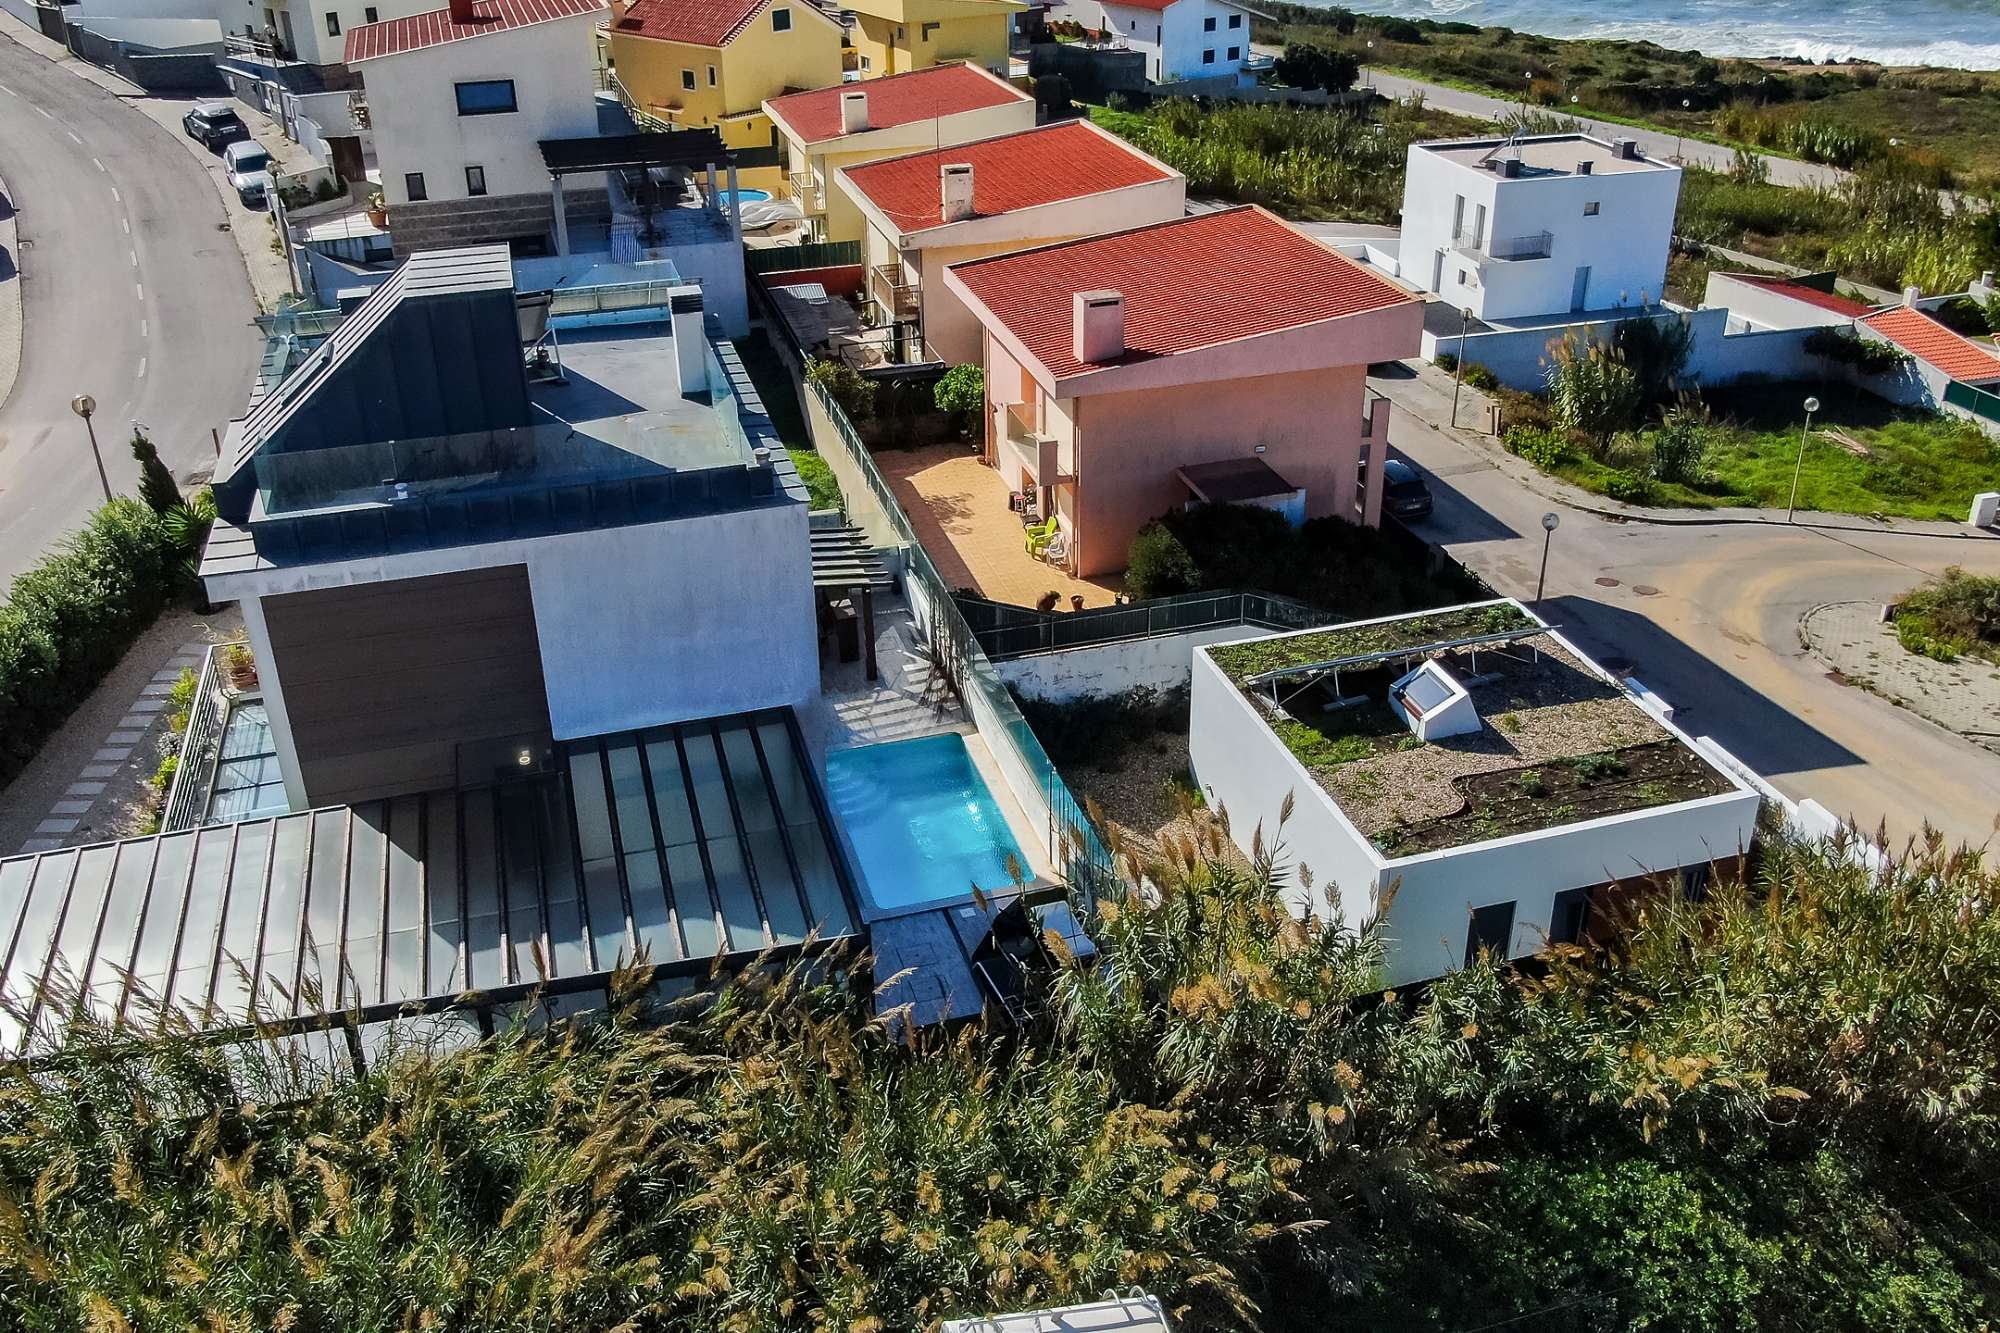 2-bedroom completely renovated villa with garden and sea views in Ribamar, Mafra